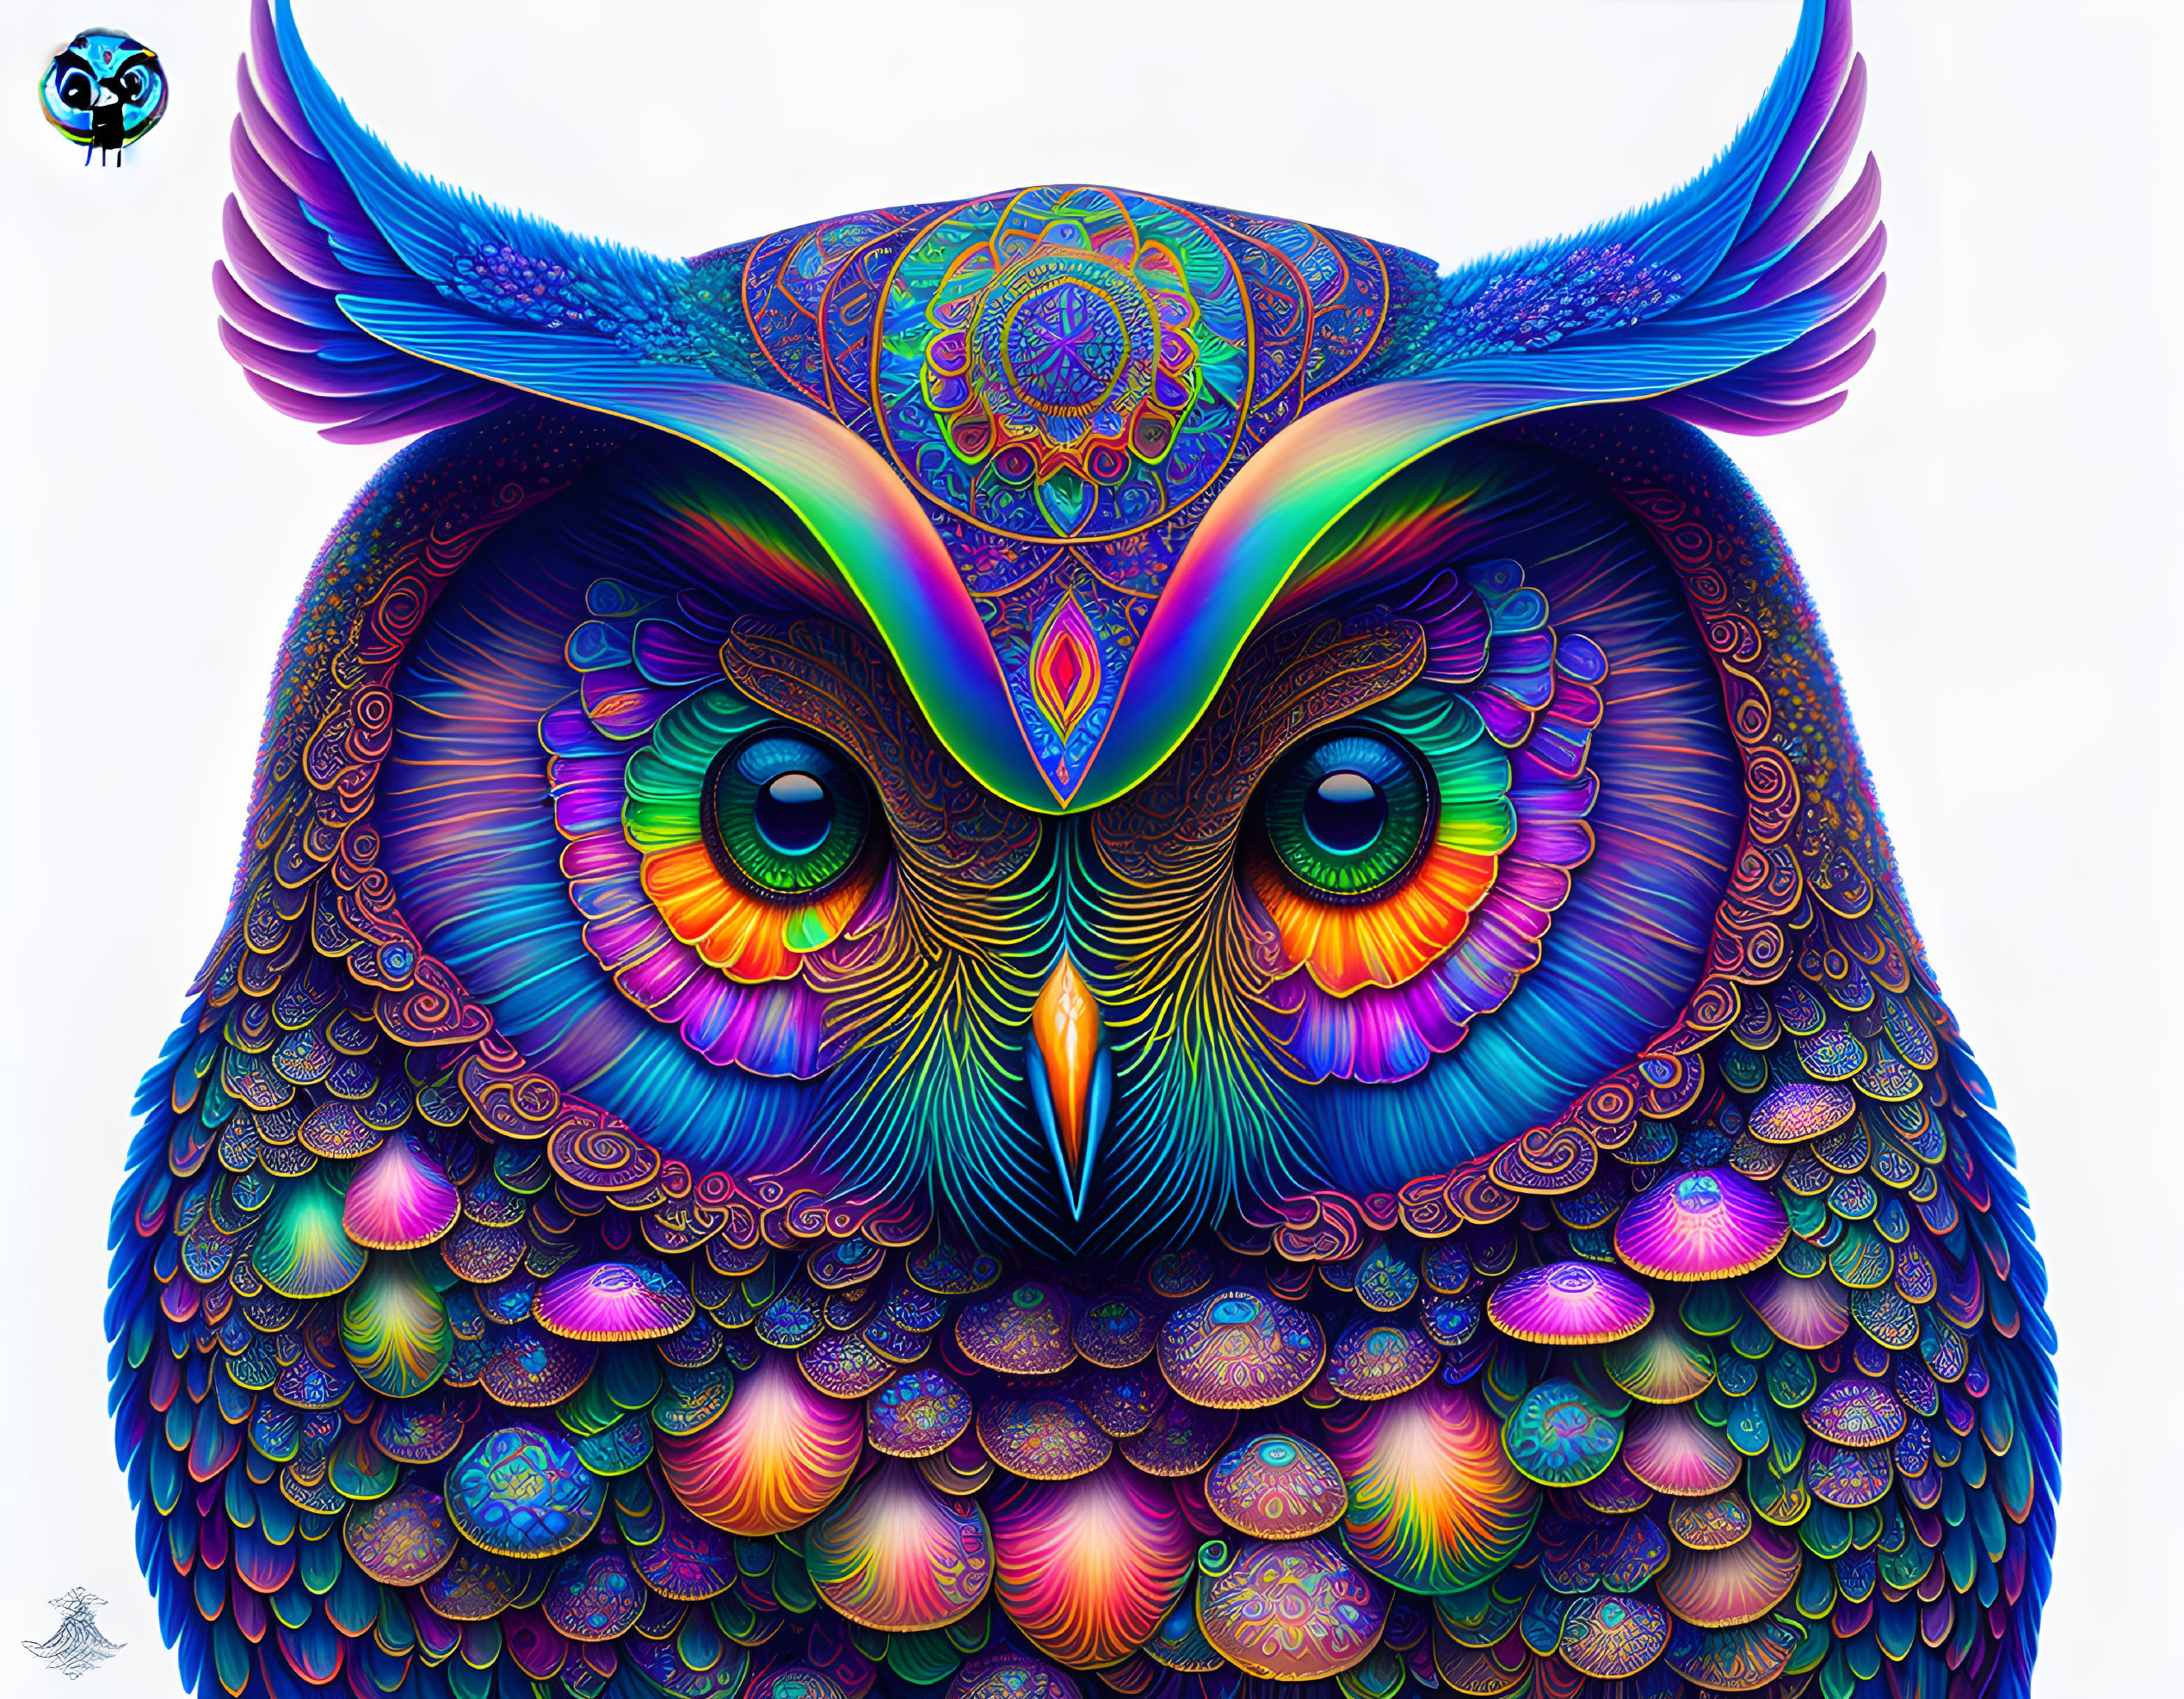 Psychedelic owl #2